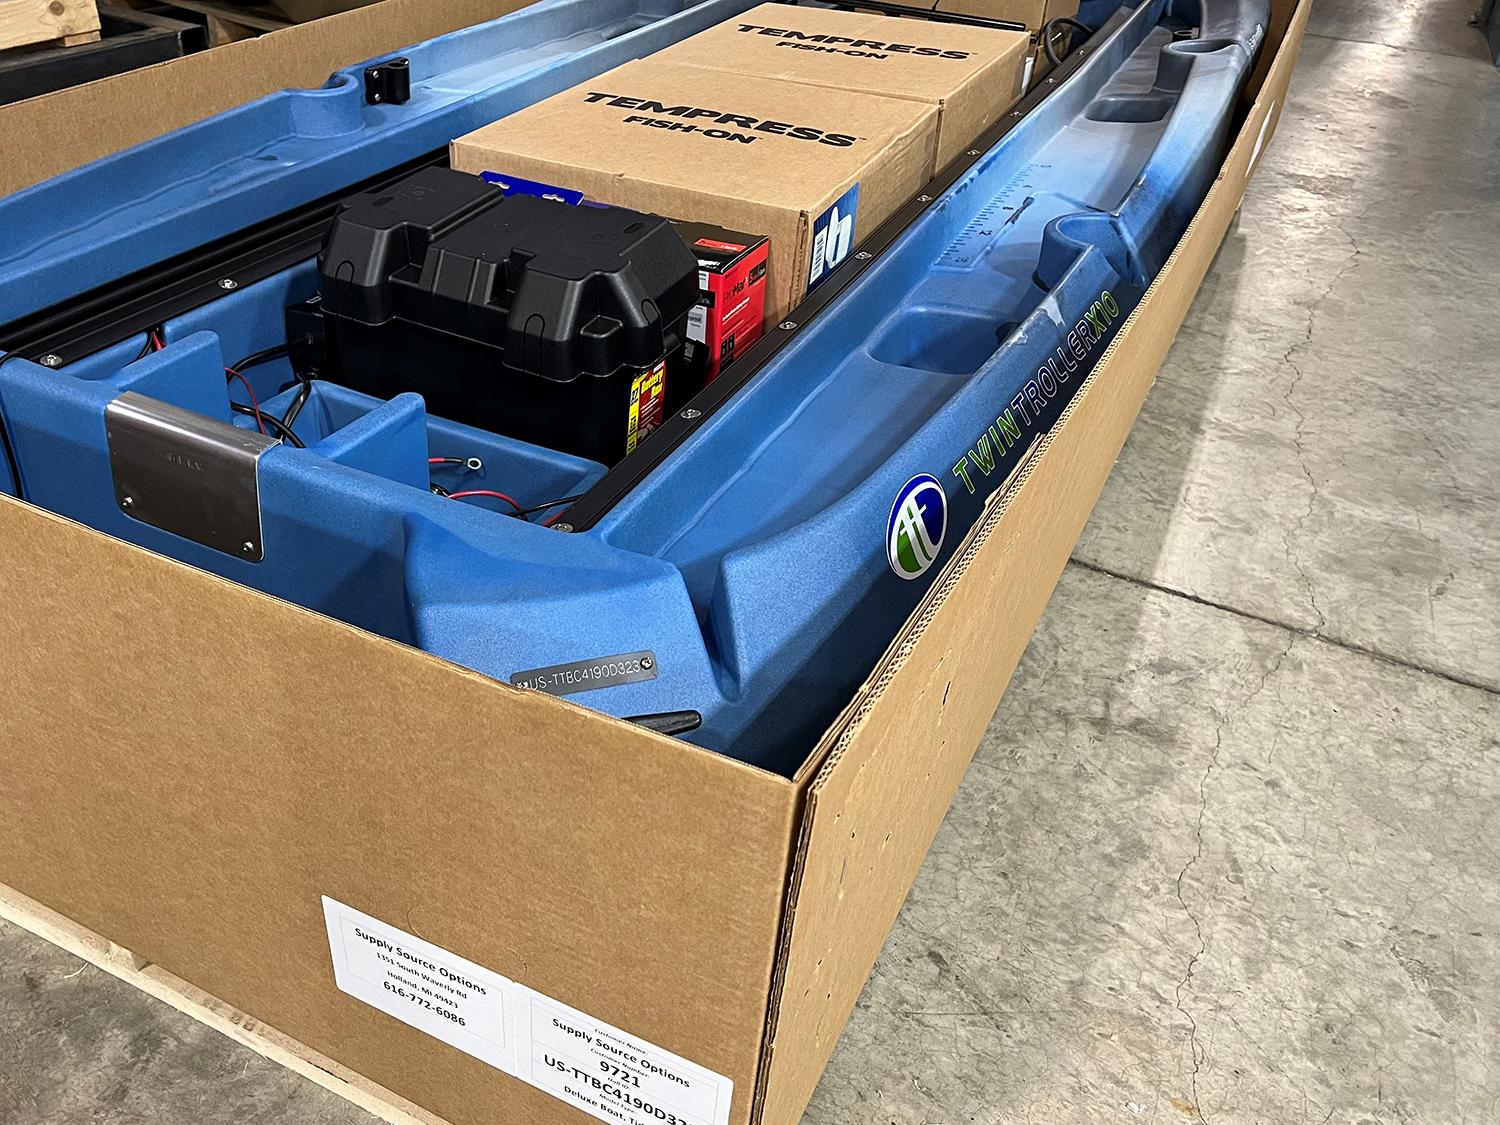 Contract manufacturing case study for Freedom Electric Marine - SupplySourceOptions.com